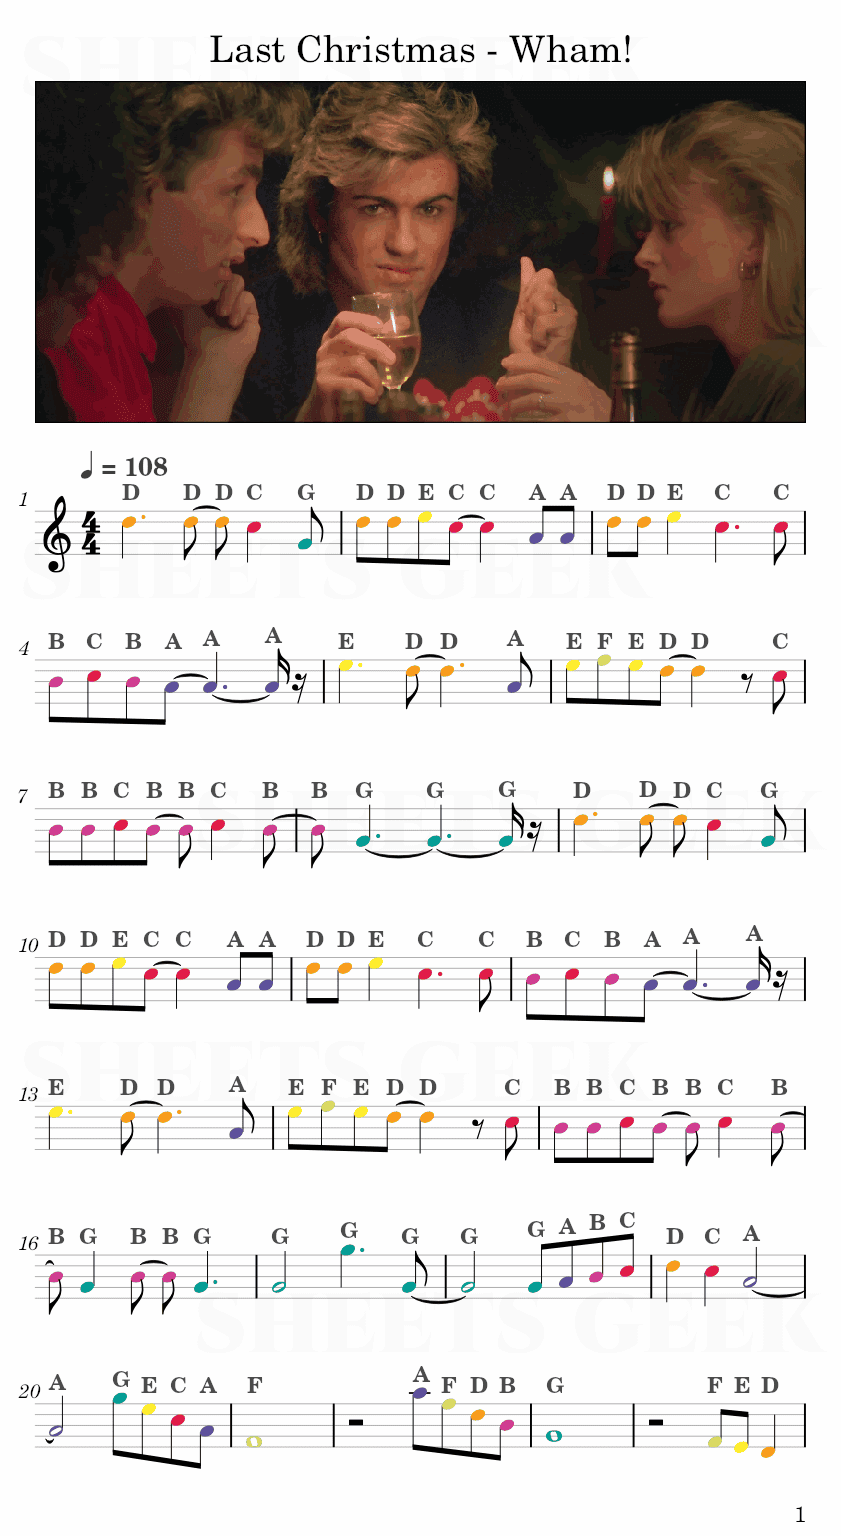 Last Christmas - Wham! Easy Sheet Music Free for piano, keyboard, flute, violin, sax, cello page 1